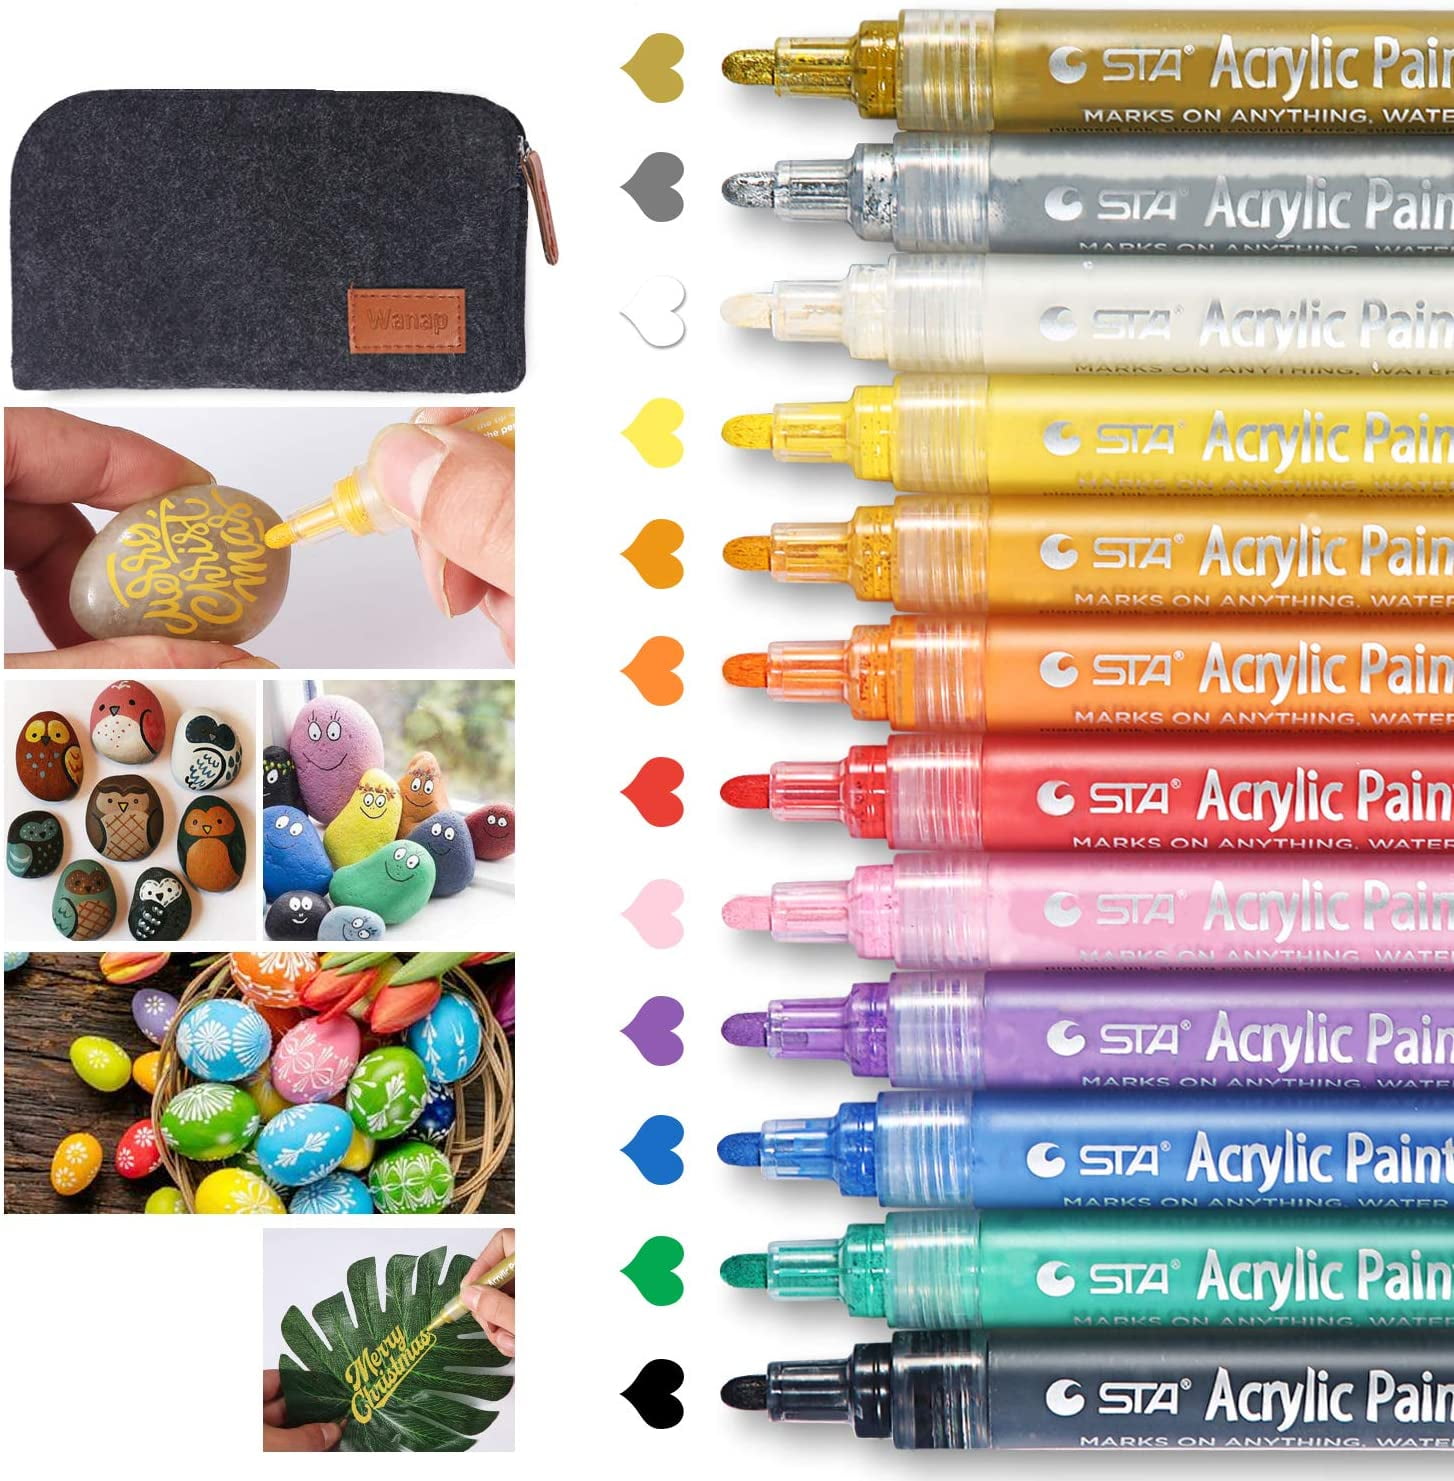 Tooli-Art Metallic Acrylic Paint Pens Marker Set for Rocks, Glass, Mugs,  and Most Surfaces with 0.7mm Extra Fine And 3.0mm Medium Tip Combo Marker  Set of 24 